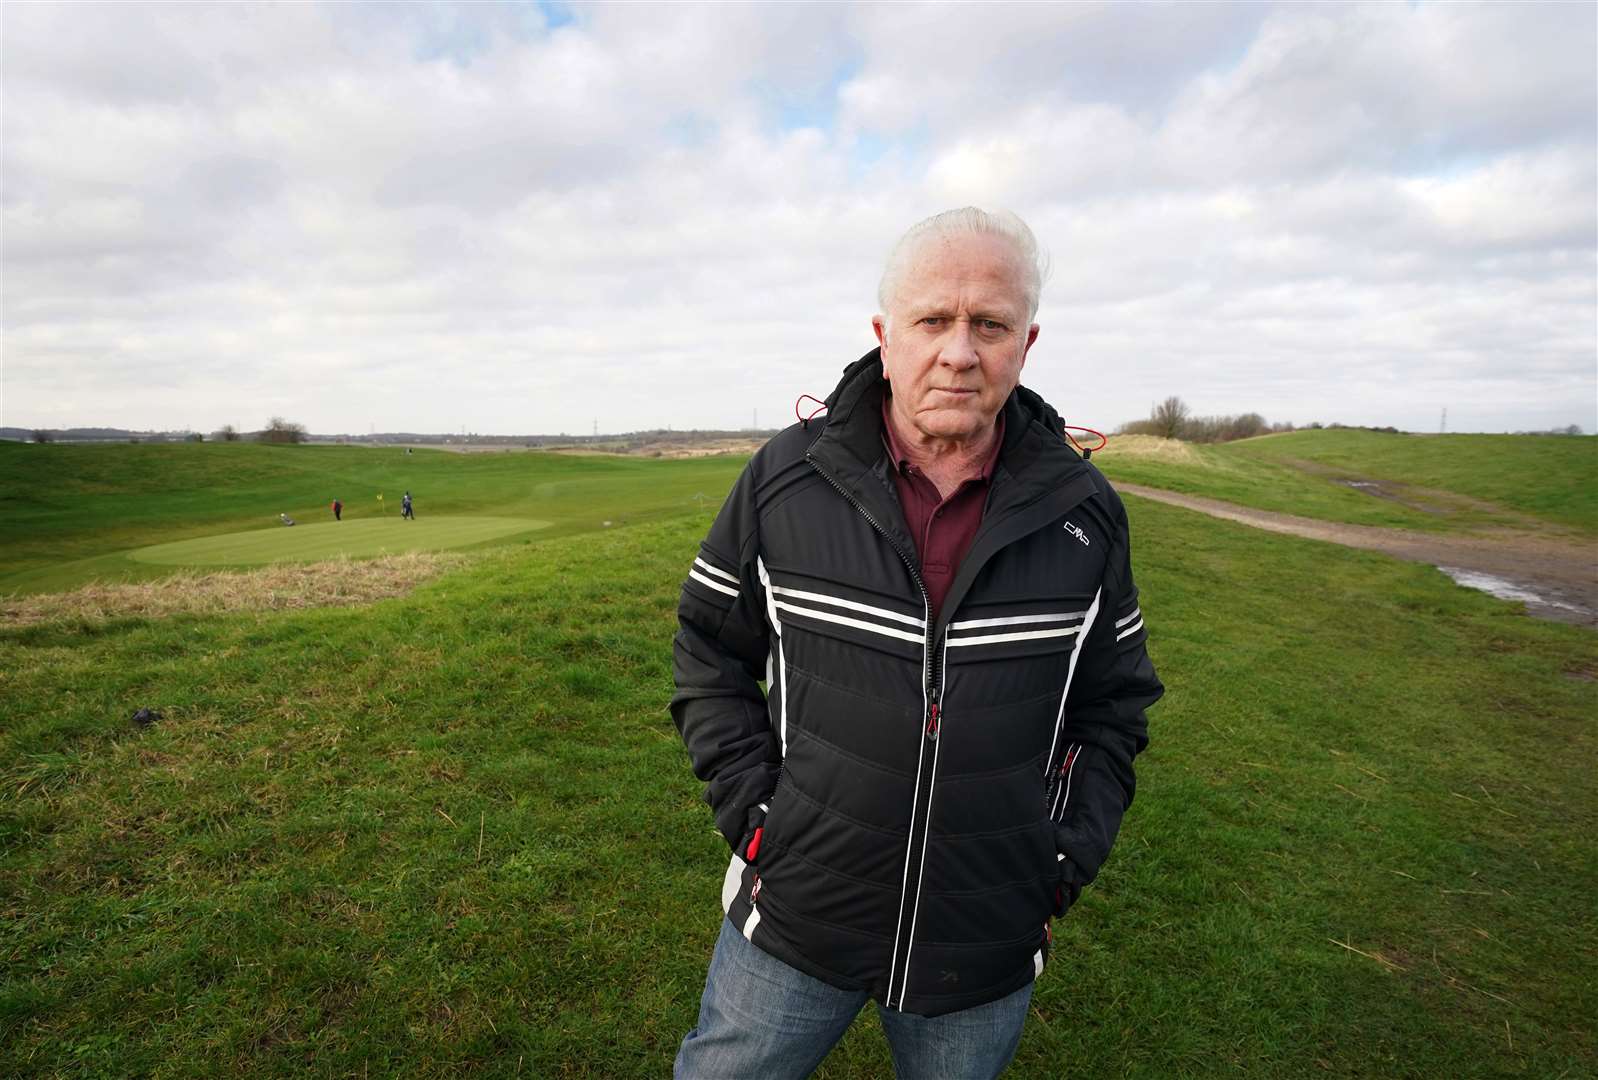 Parish councillor Vince Robson stands at the site of a proposed garden city development at Pedham Place Golf Course (Gareth Fuller/PA)